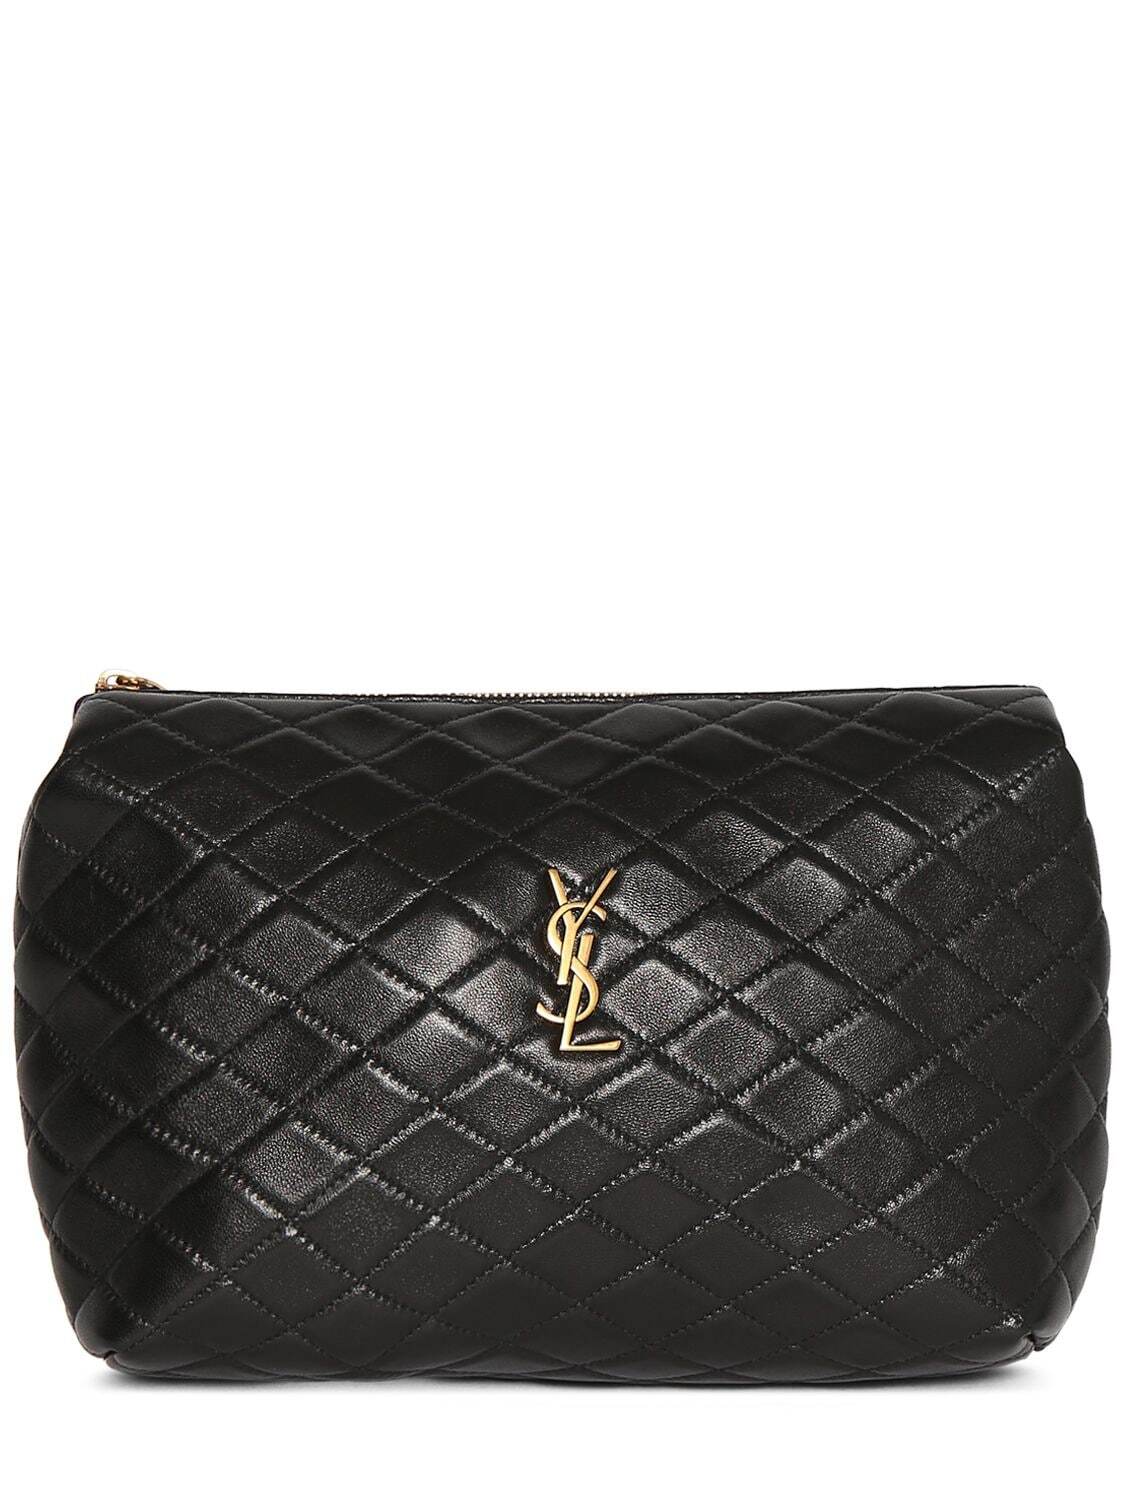 SAINT LAURENT Gaby Leather Pouch in black